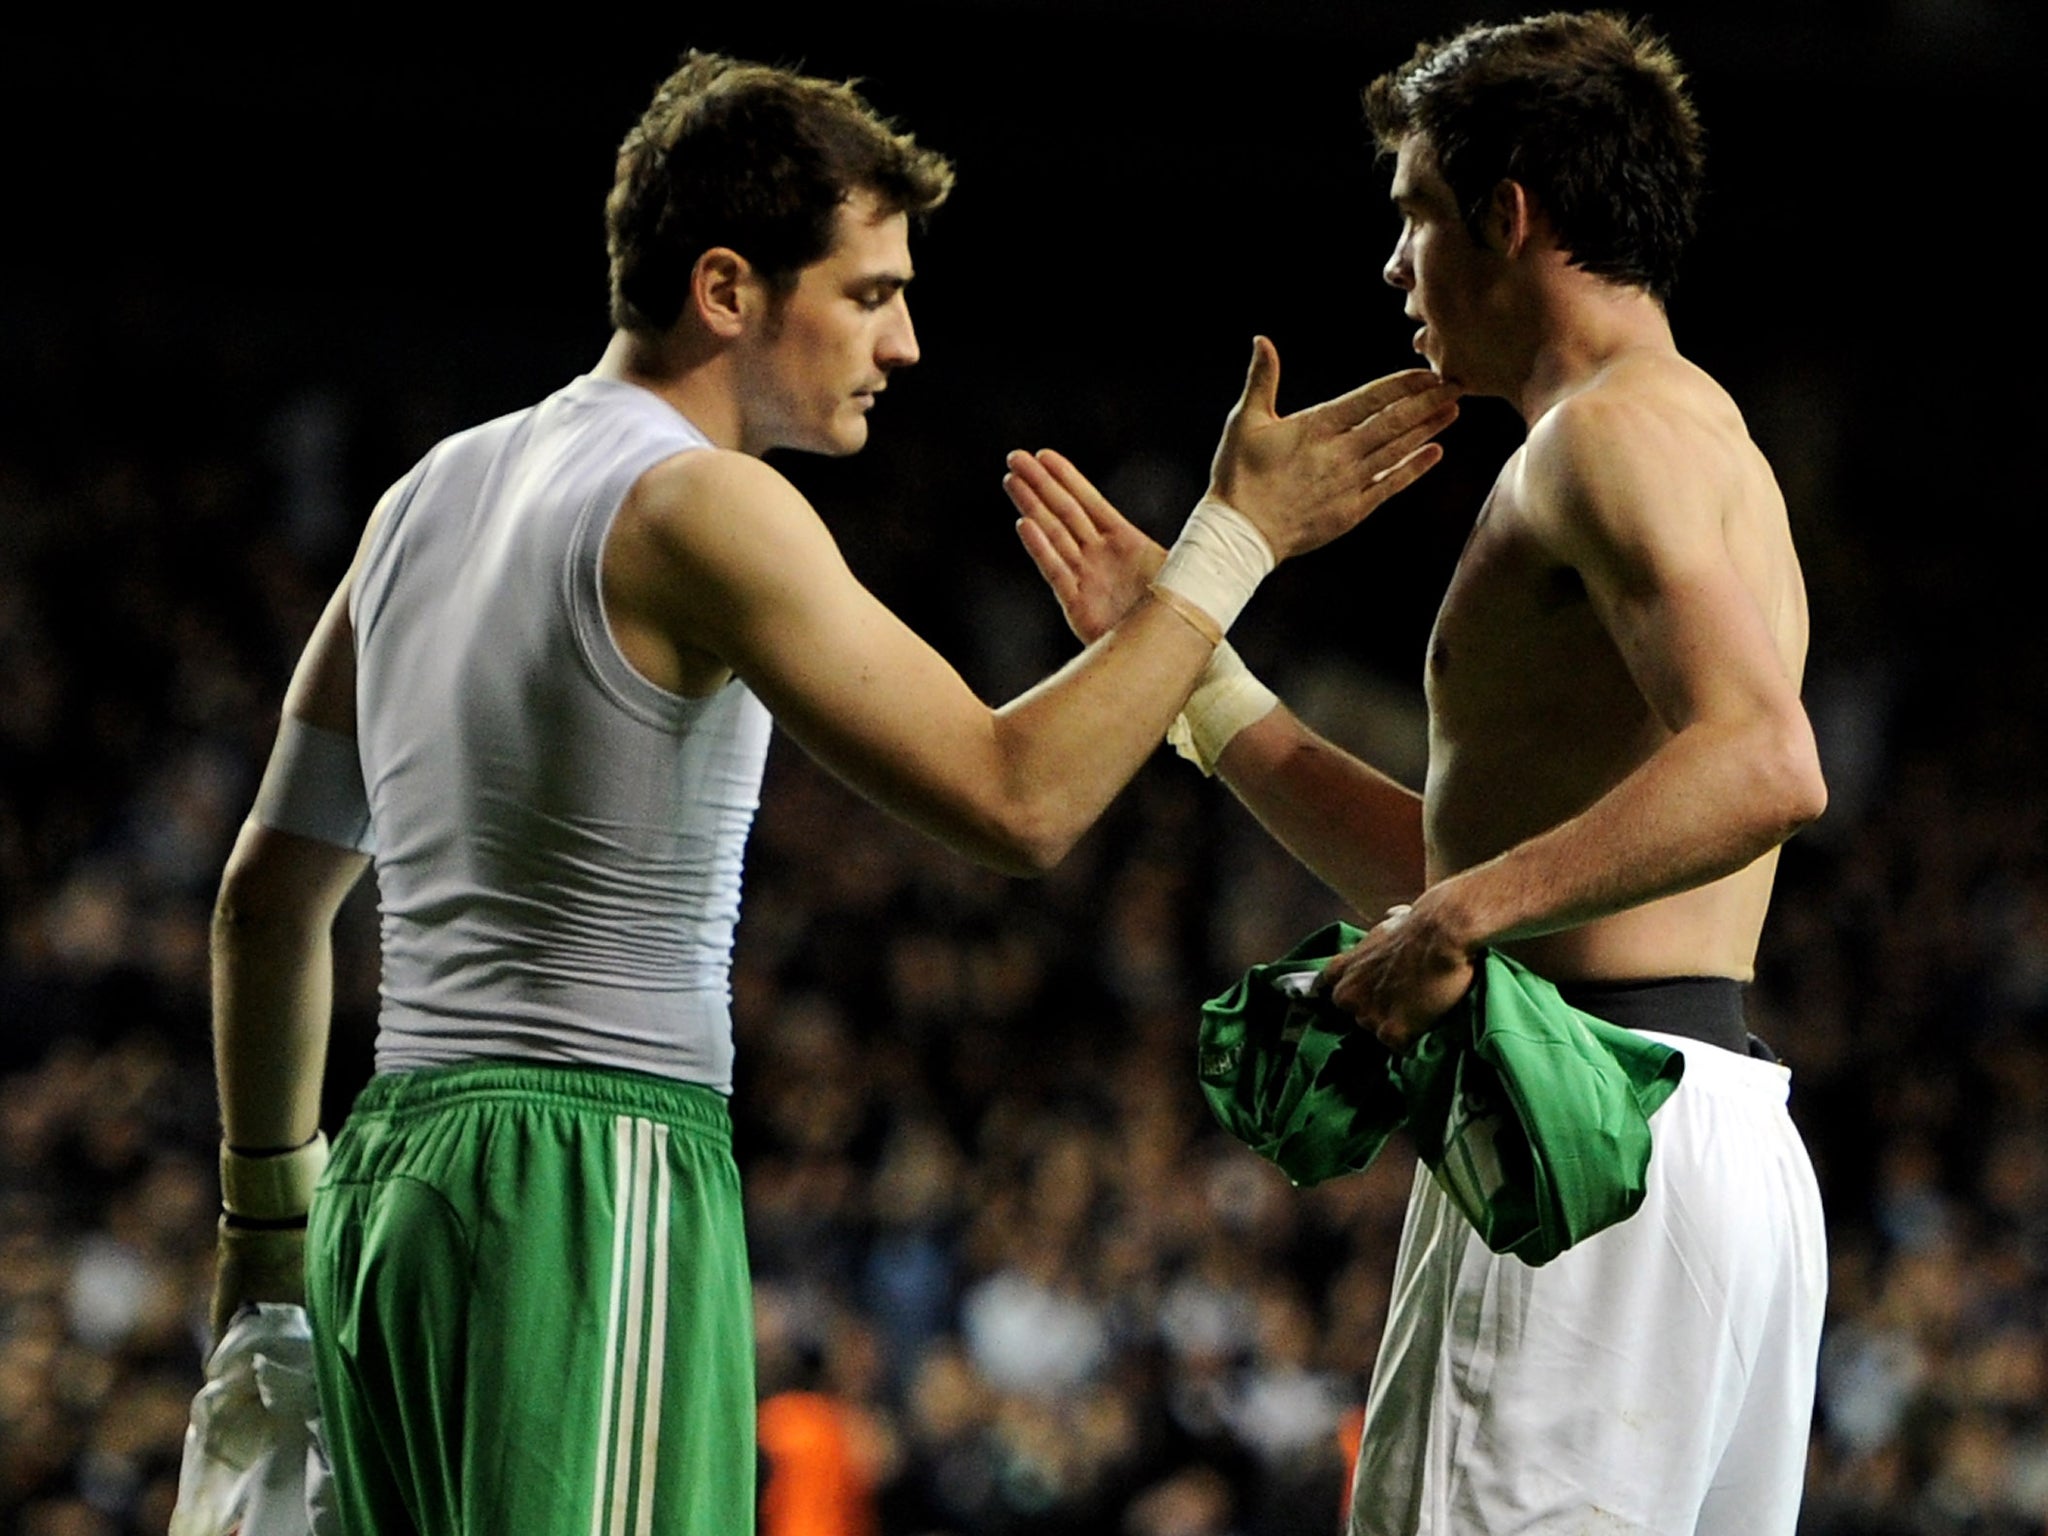 Iker Casillas shakes hands with Gareth Bale when Real Madrid met Tottenham in the Champions League in 2011